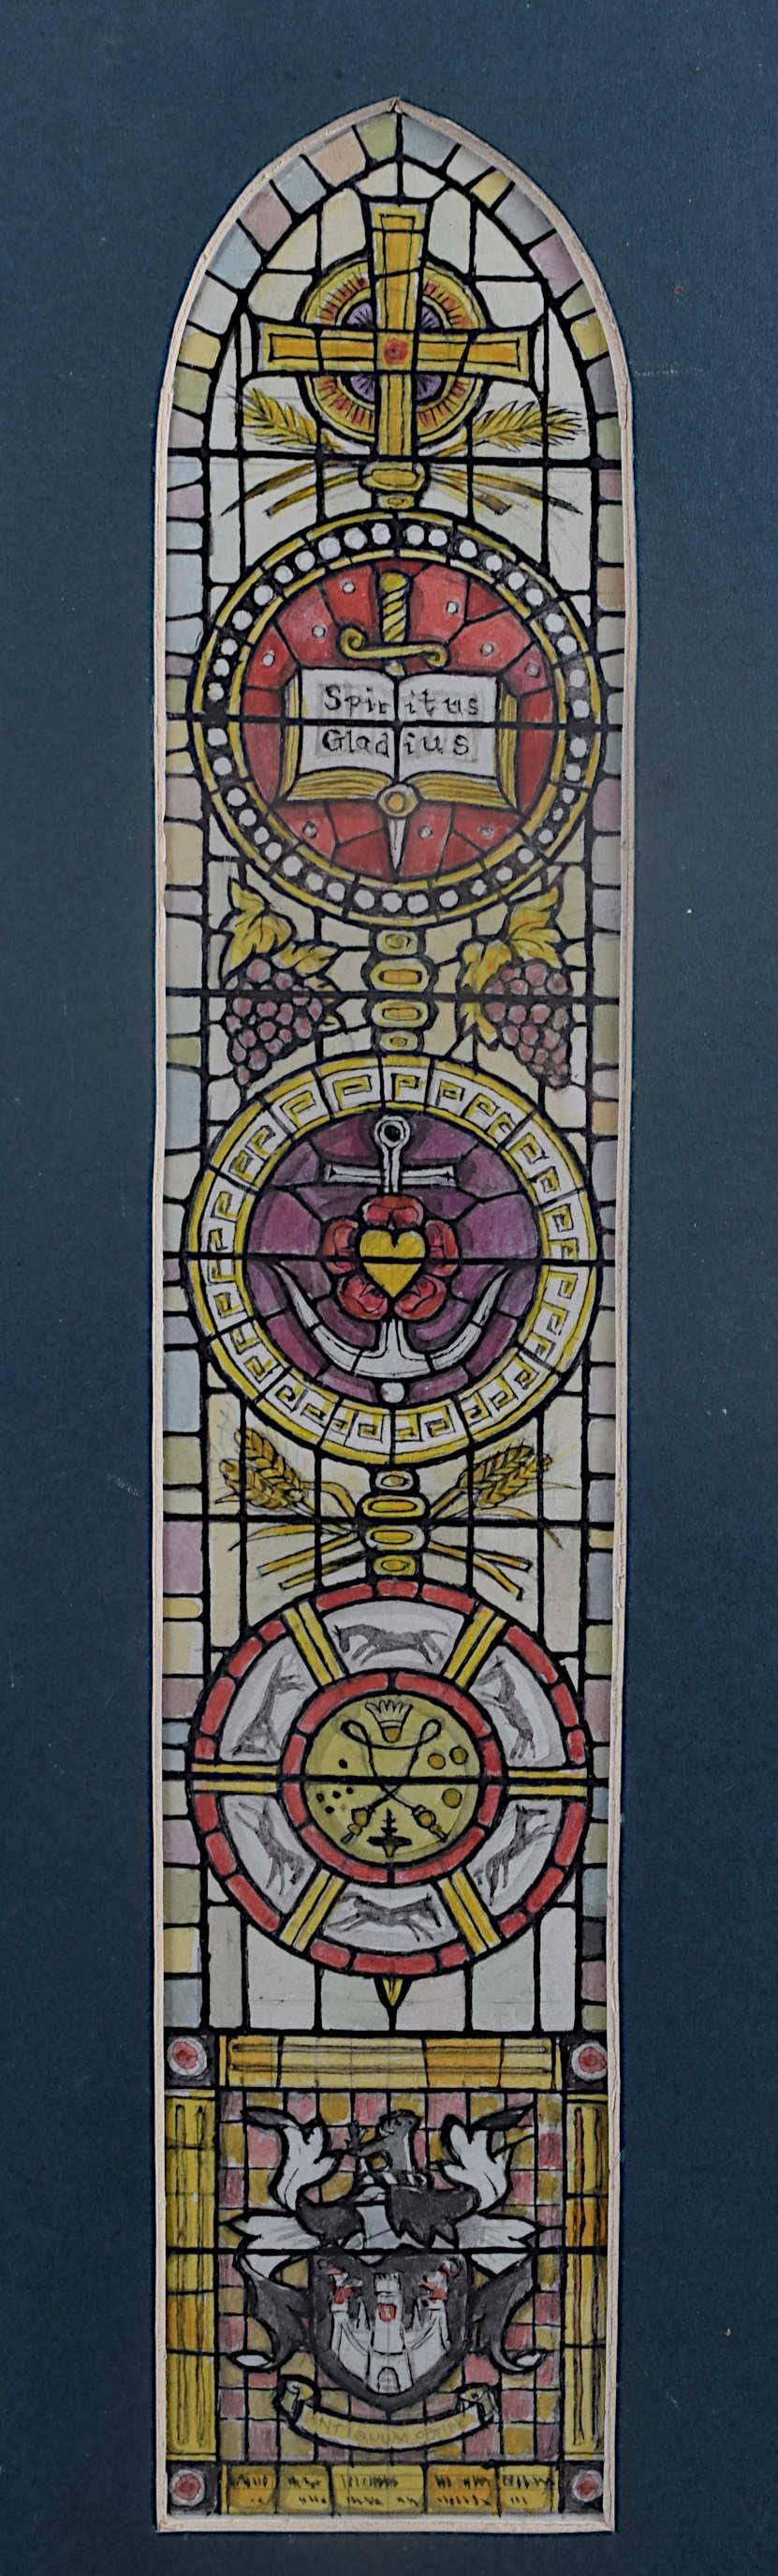 We acquired a series of watercolour stained glass designs from Jane Gray's studio. To find more scroll down to "More from this Seller" and below it click on "See all from this seller." 

Jane Gray (b.1931)
Stained Glass Design
Watercolour
27.5 x 5